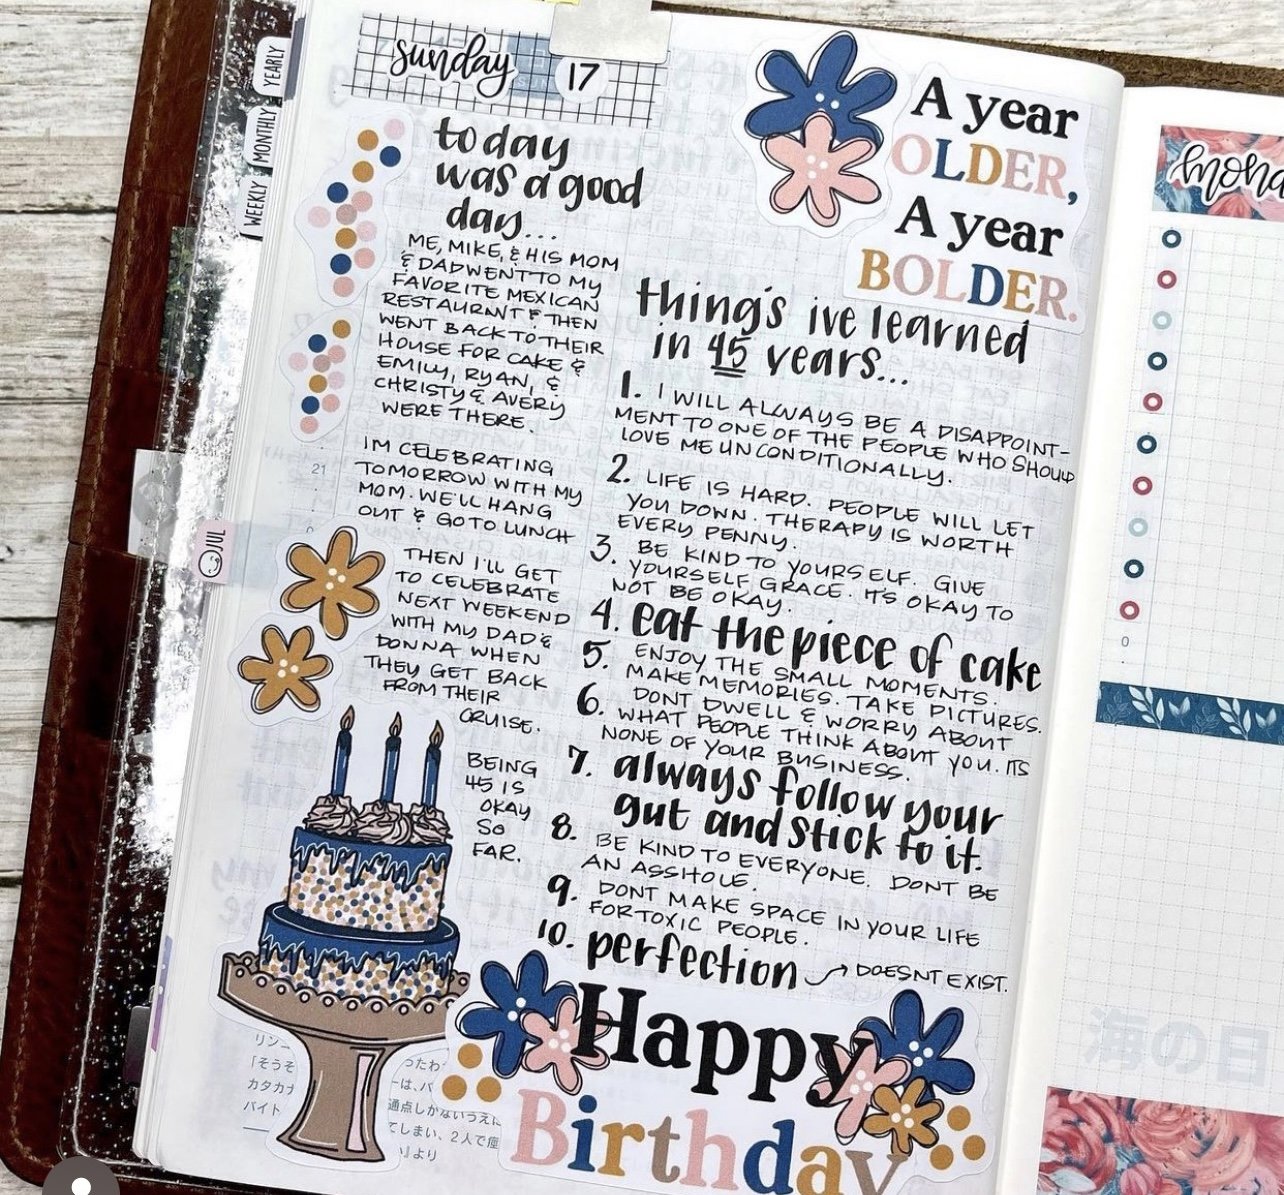 PlannerCRUSH - September — The Planner Wire